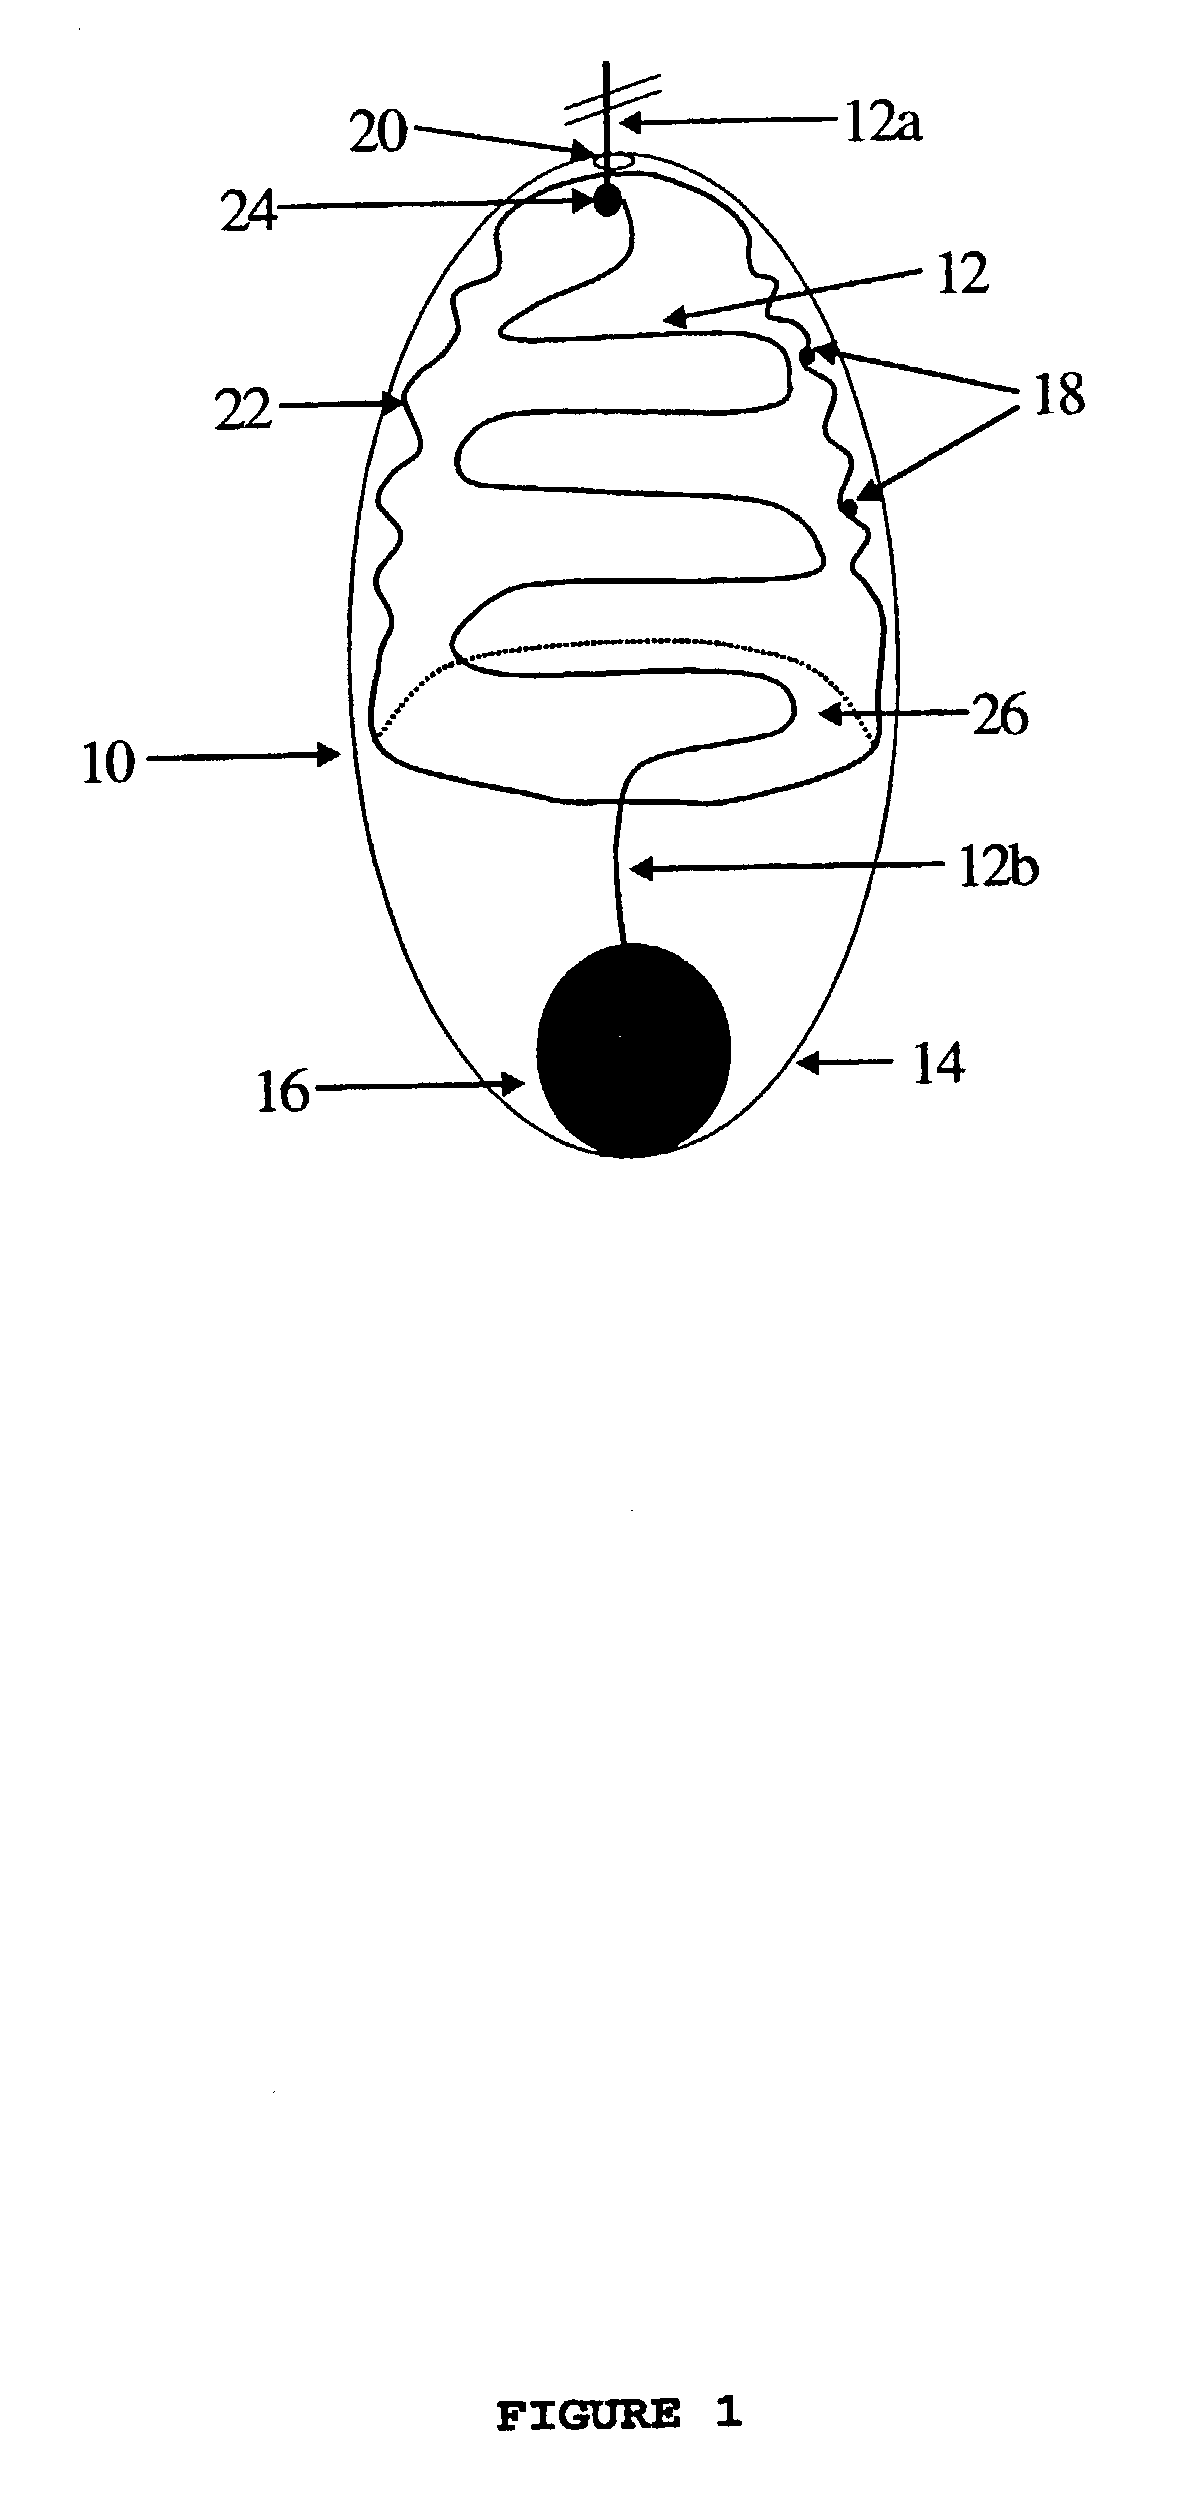 Methods and devices for obtaining samples from hollow viscera